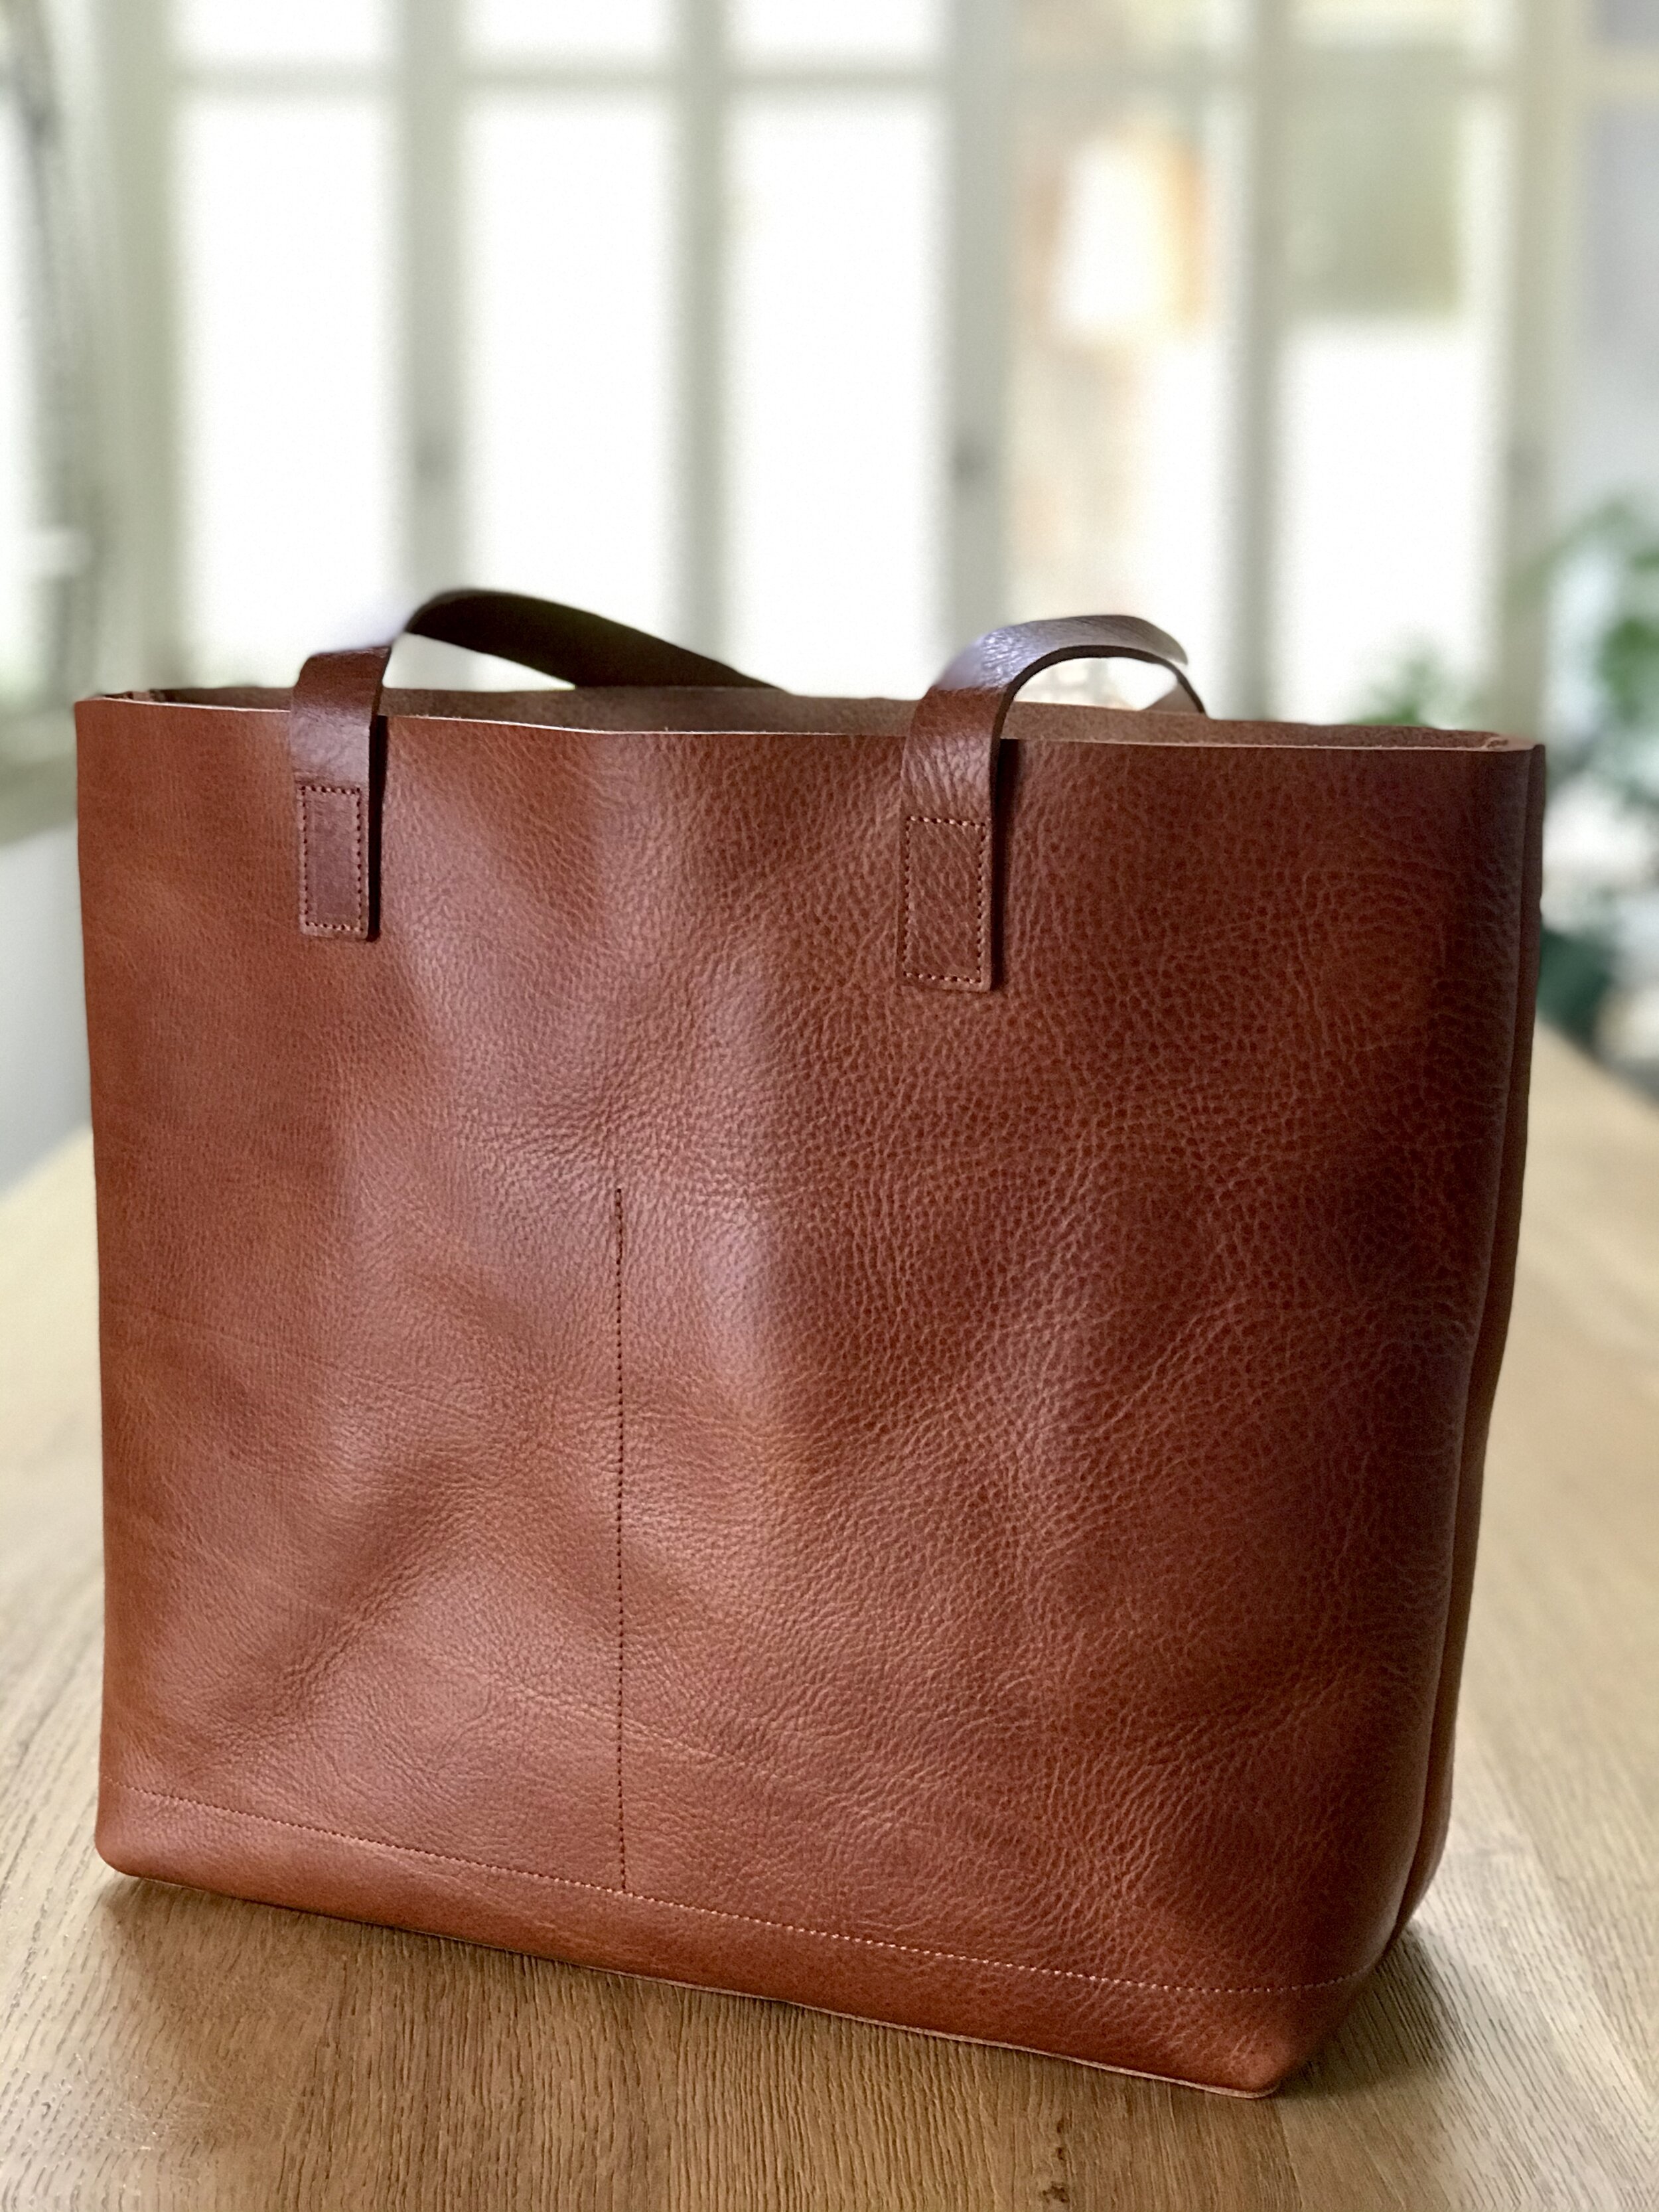 Buy Tan Handcrafted Genuine Leather Tote Bag Online at Jayporecom